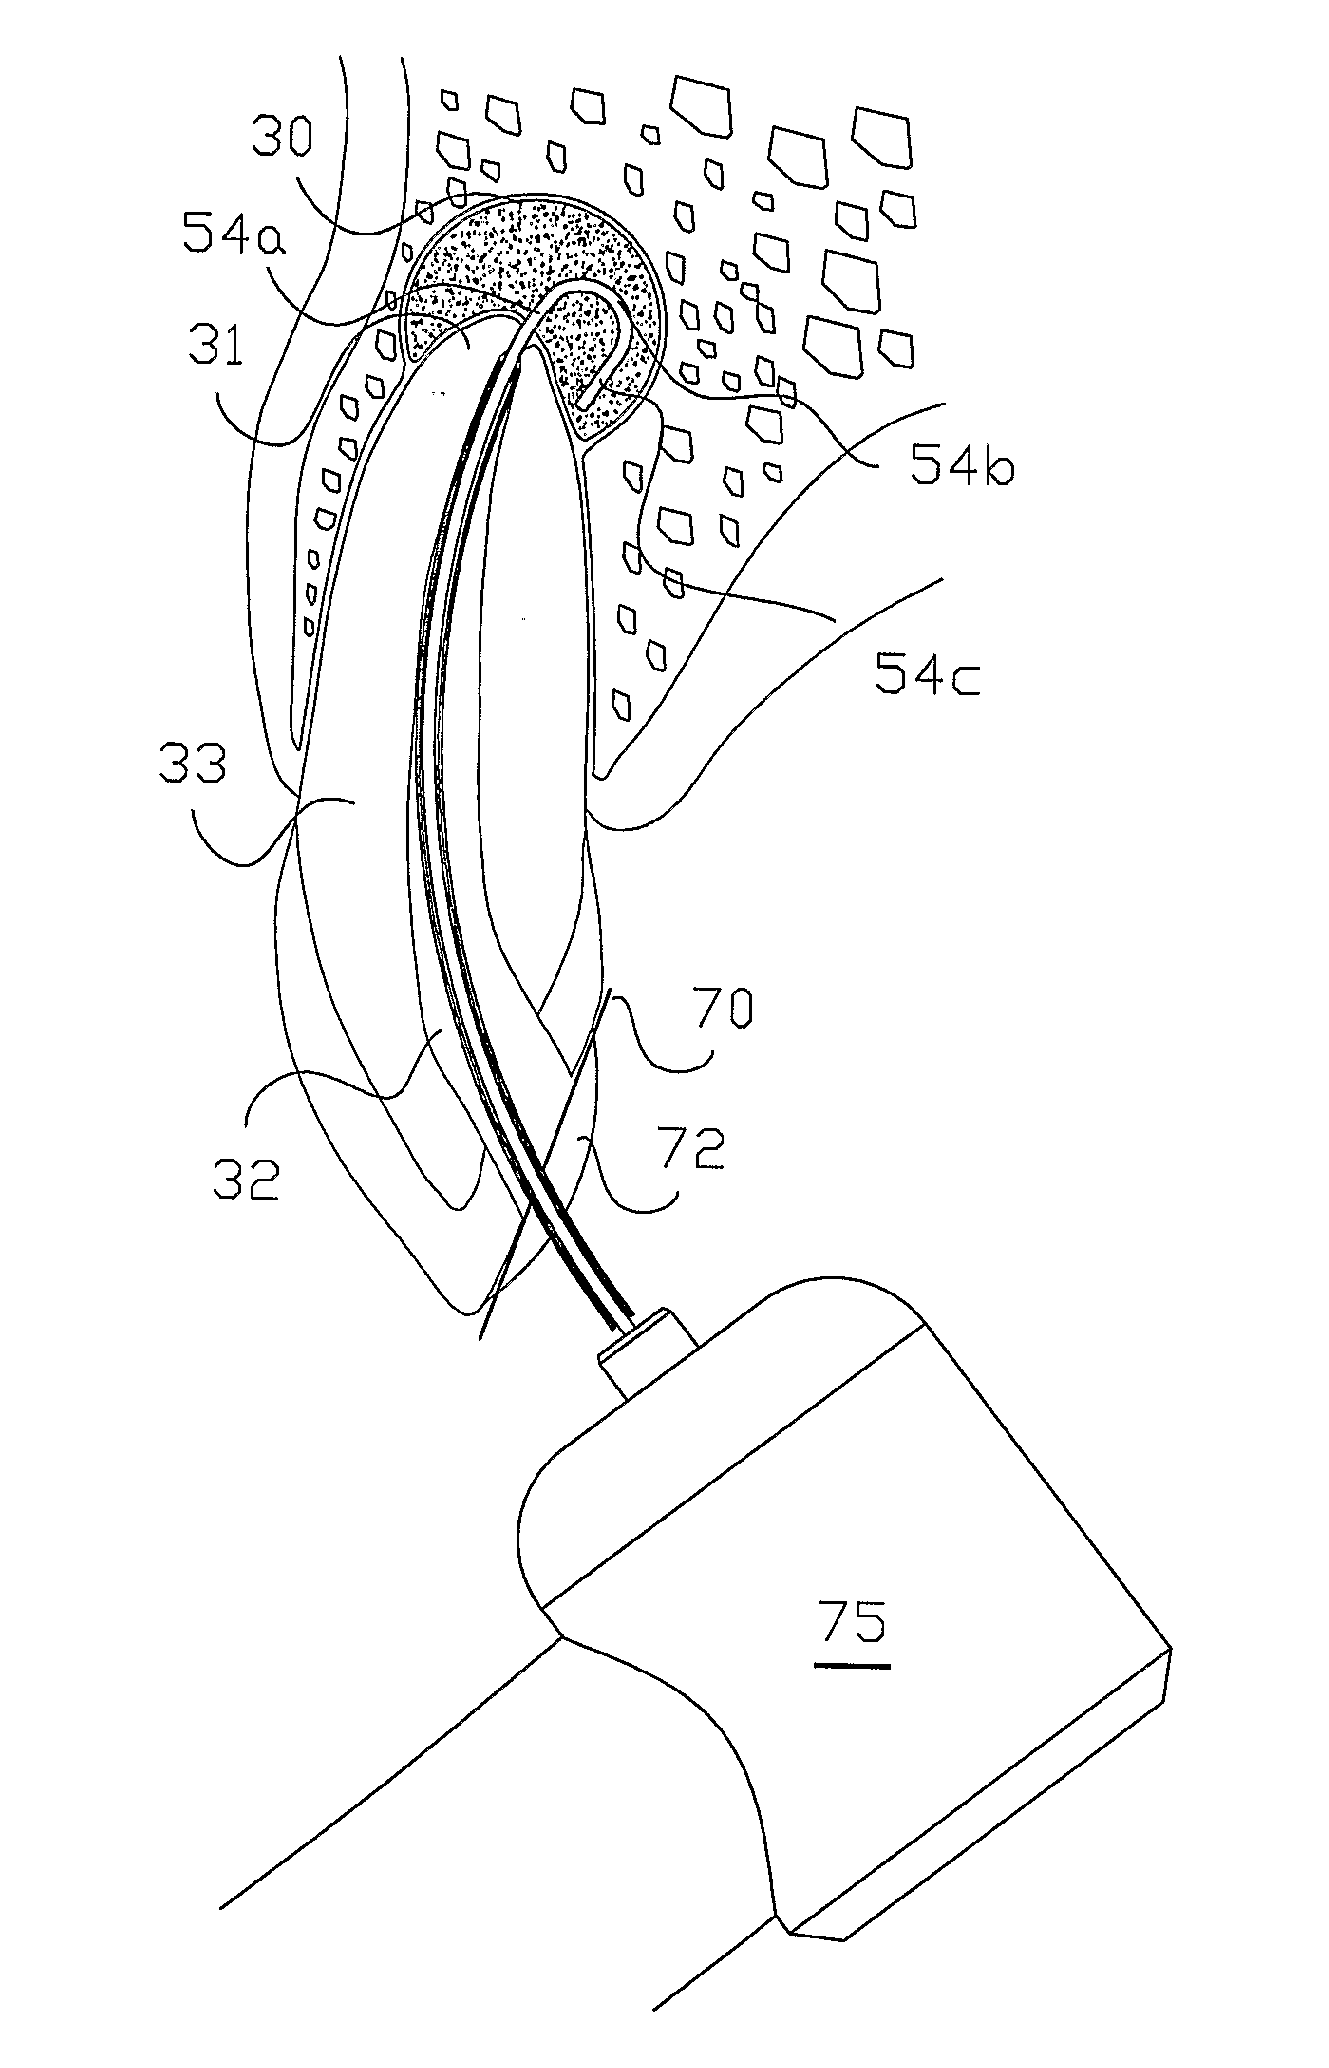 Method of Treating Dental Periapical Lesions